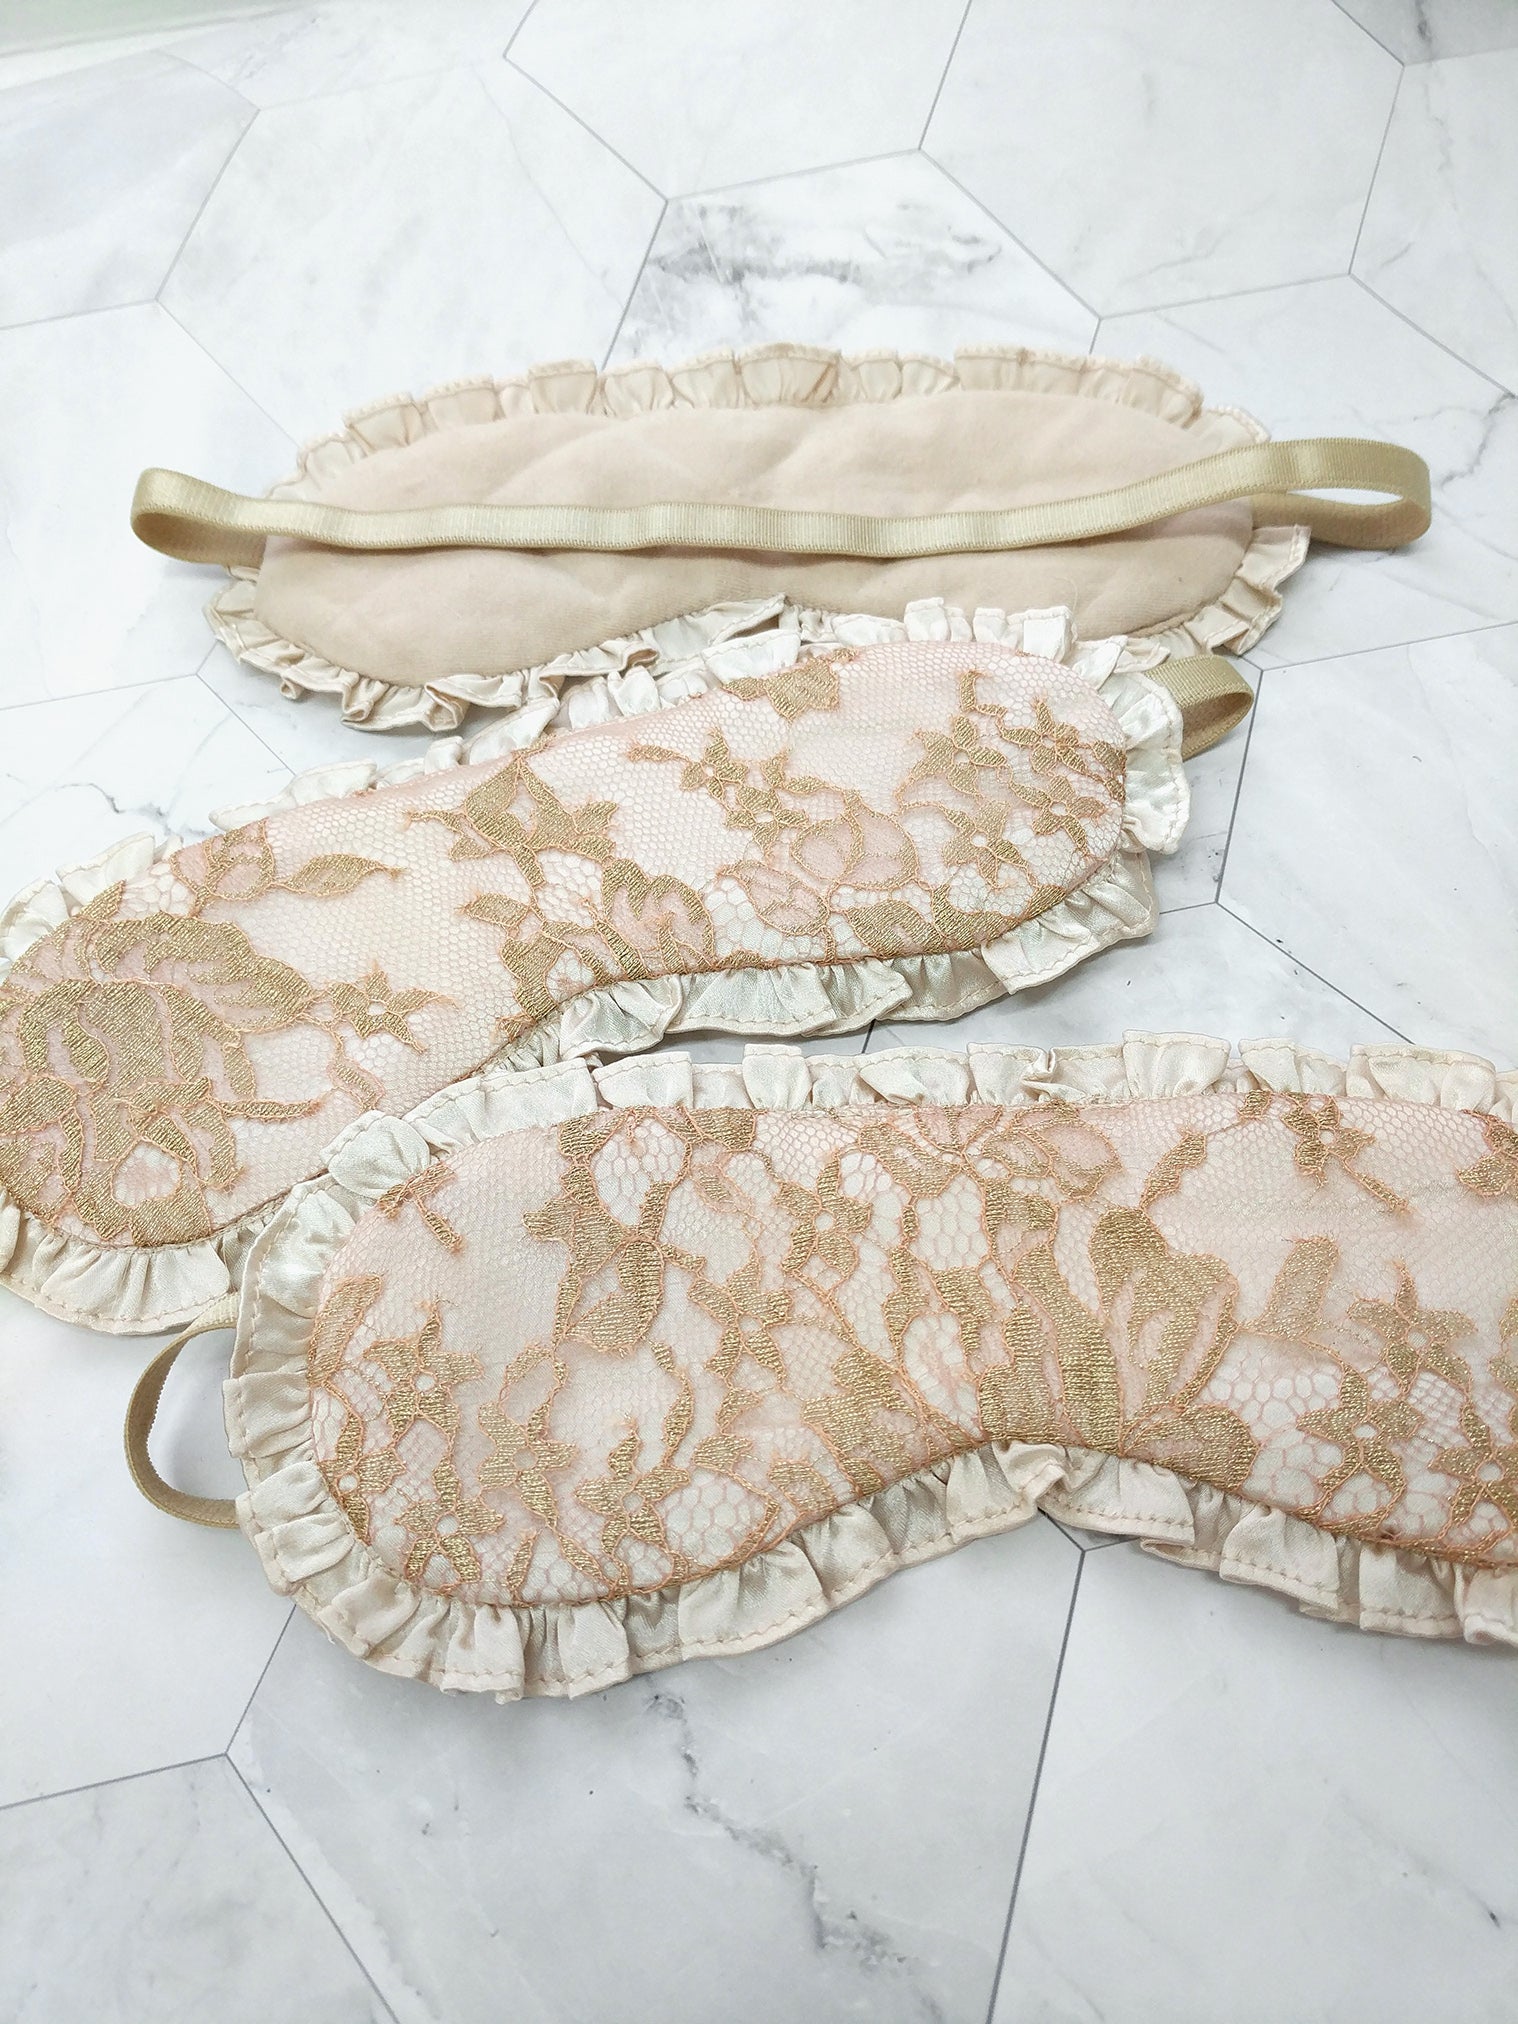 Blush pink sleepmasks in 100% silk with gold french lace and ruffles